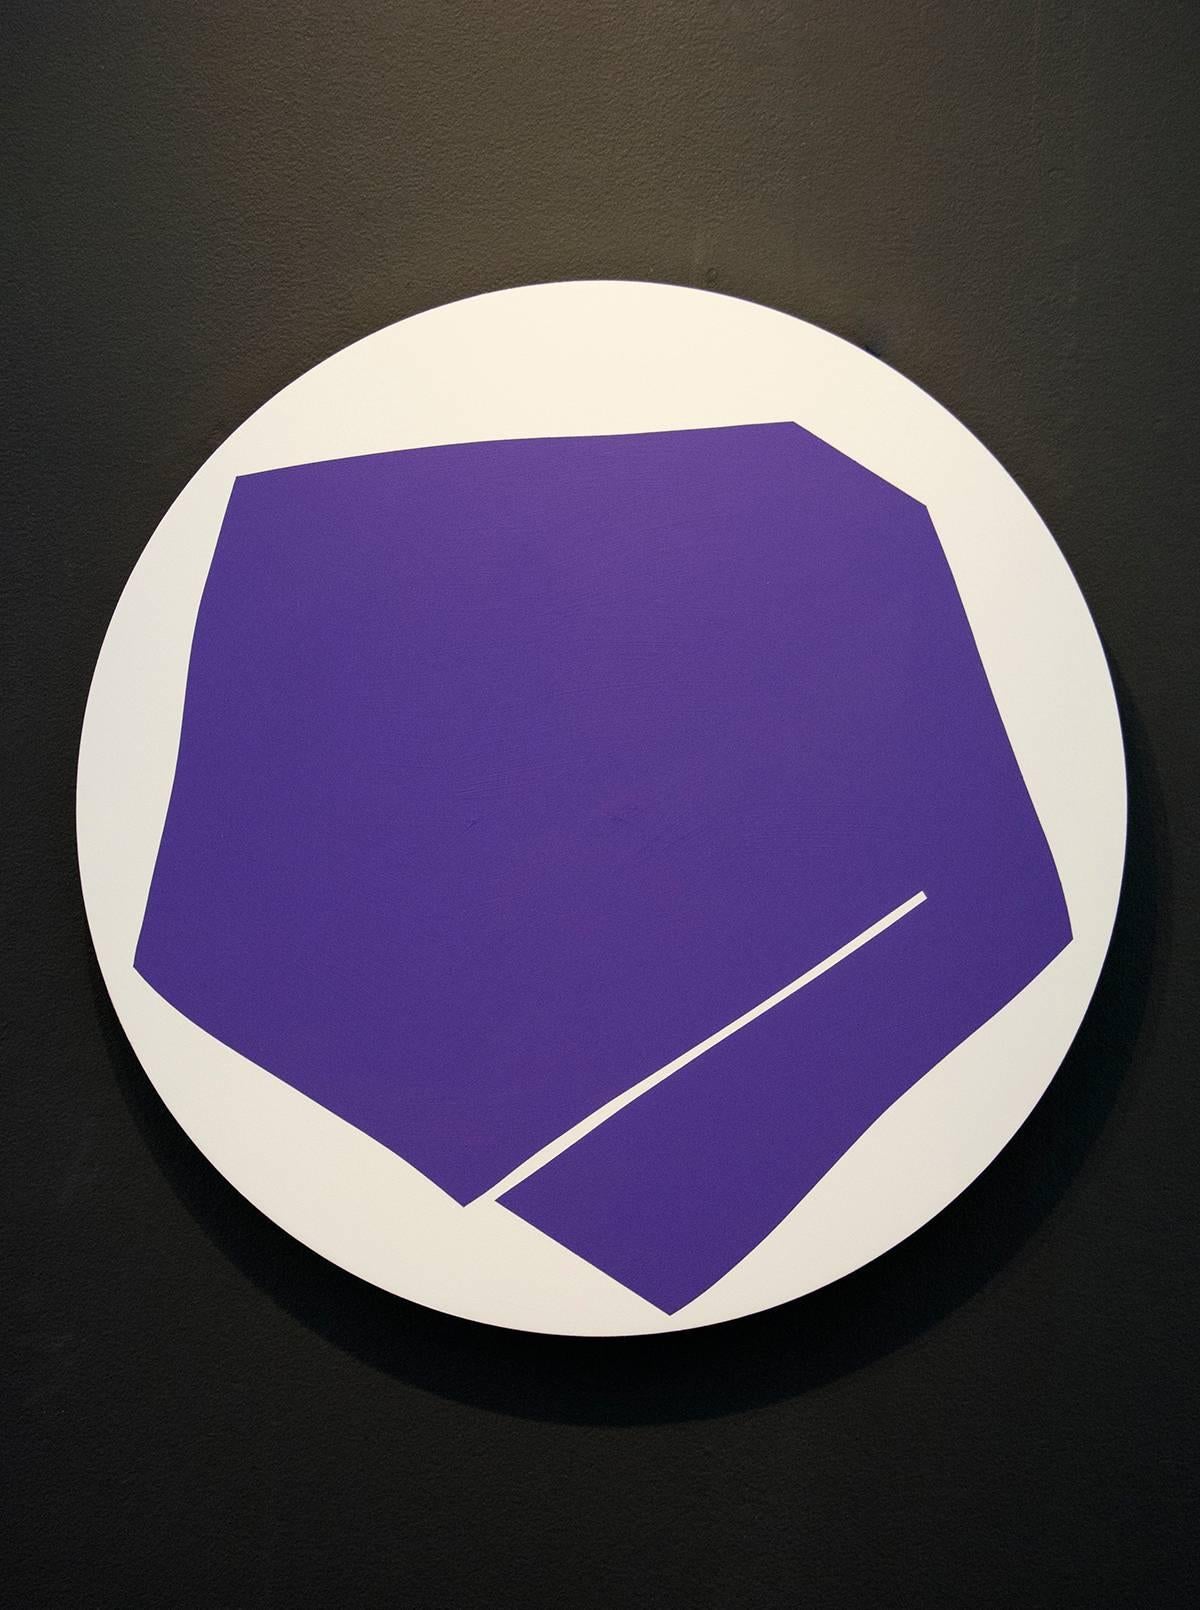 Round Violet with 1 Line - colourful, gold leaf edge, tondo acrylic on panel